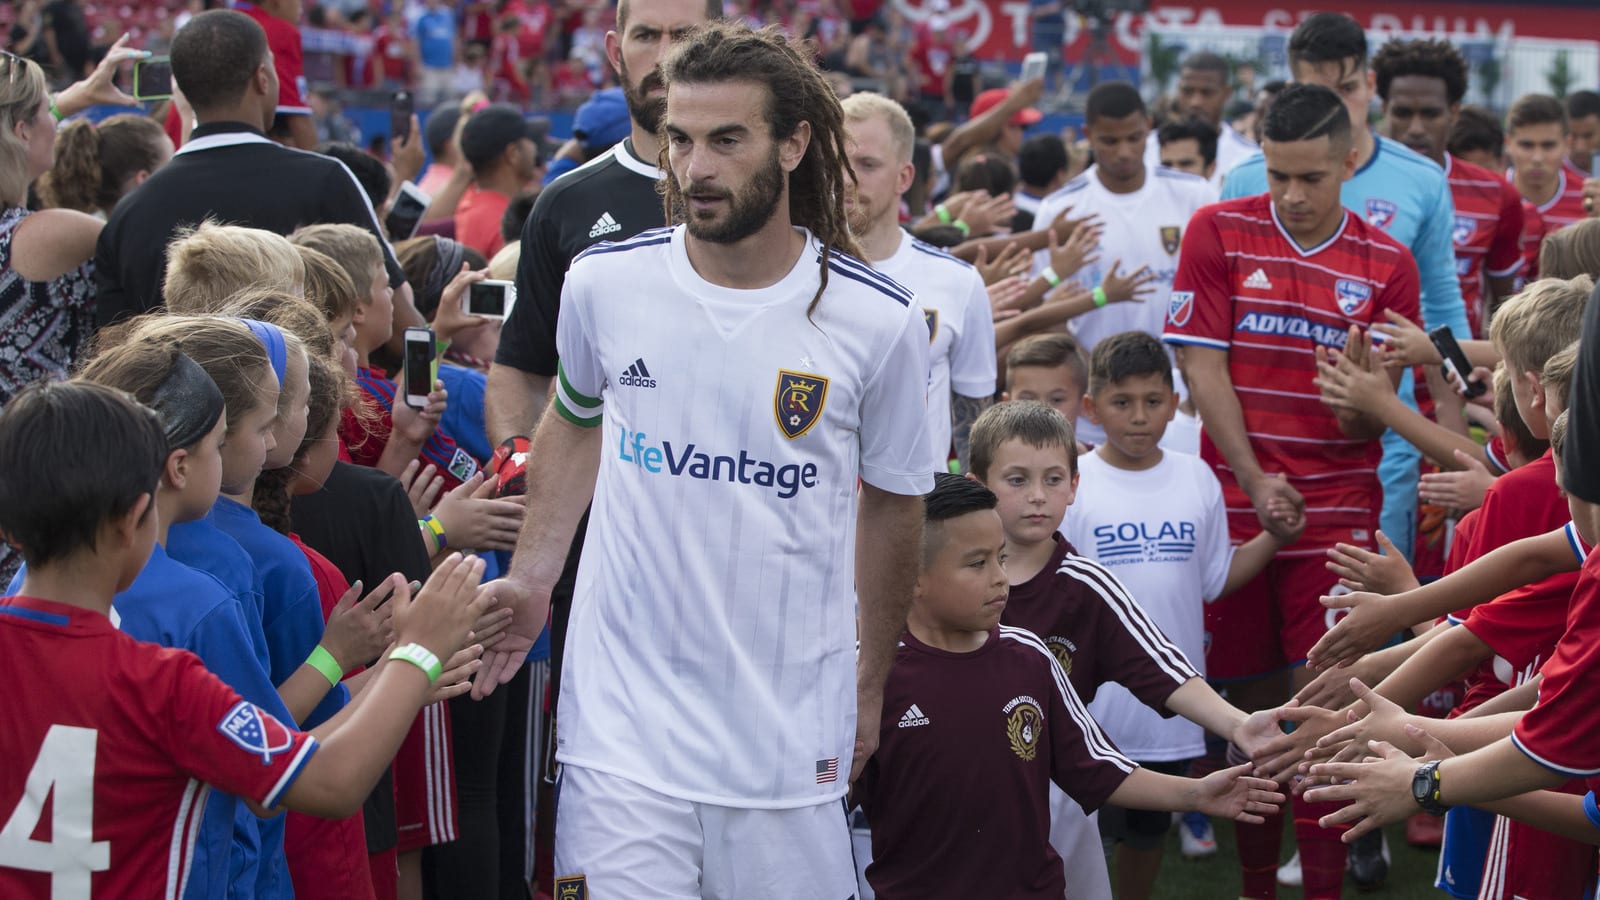 Kicking It: Could RSL's struggles be part of a new era in MLS?